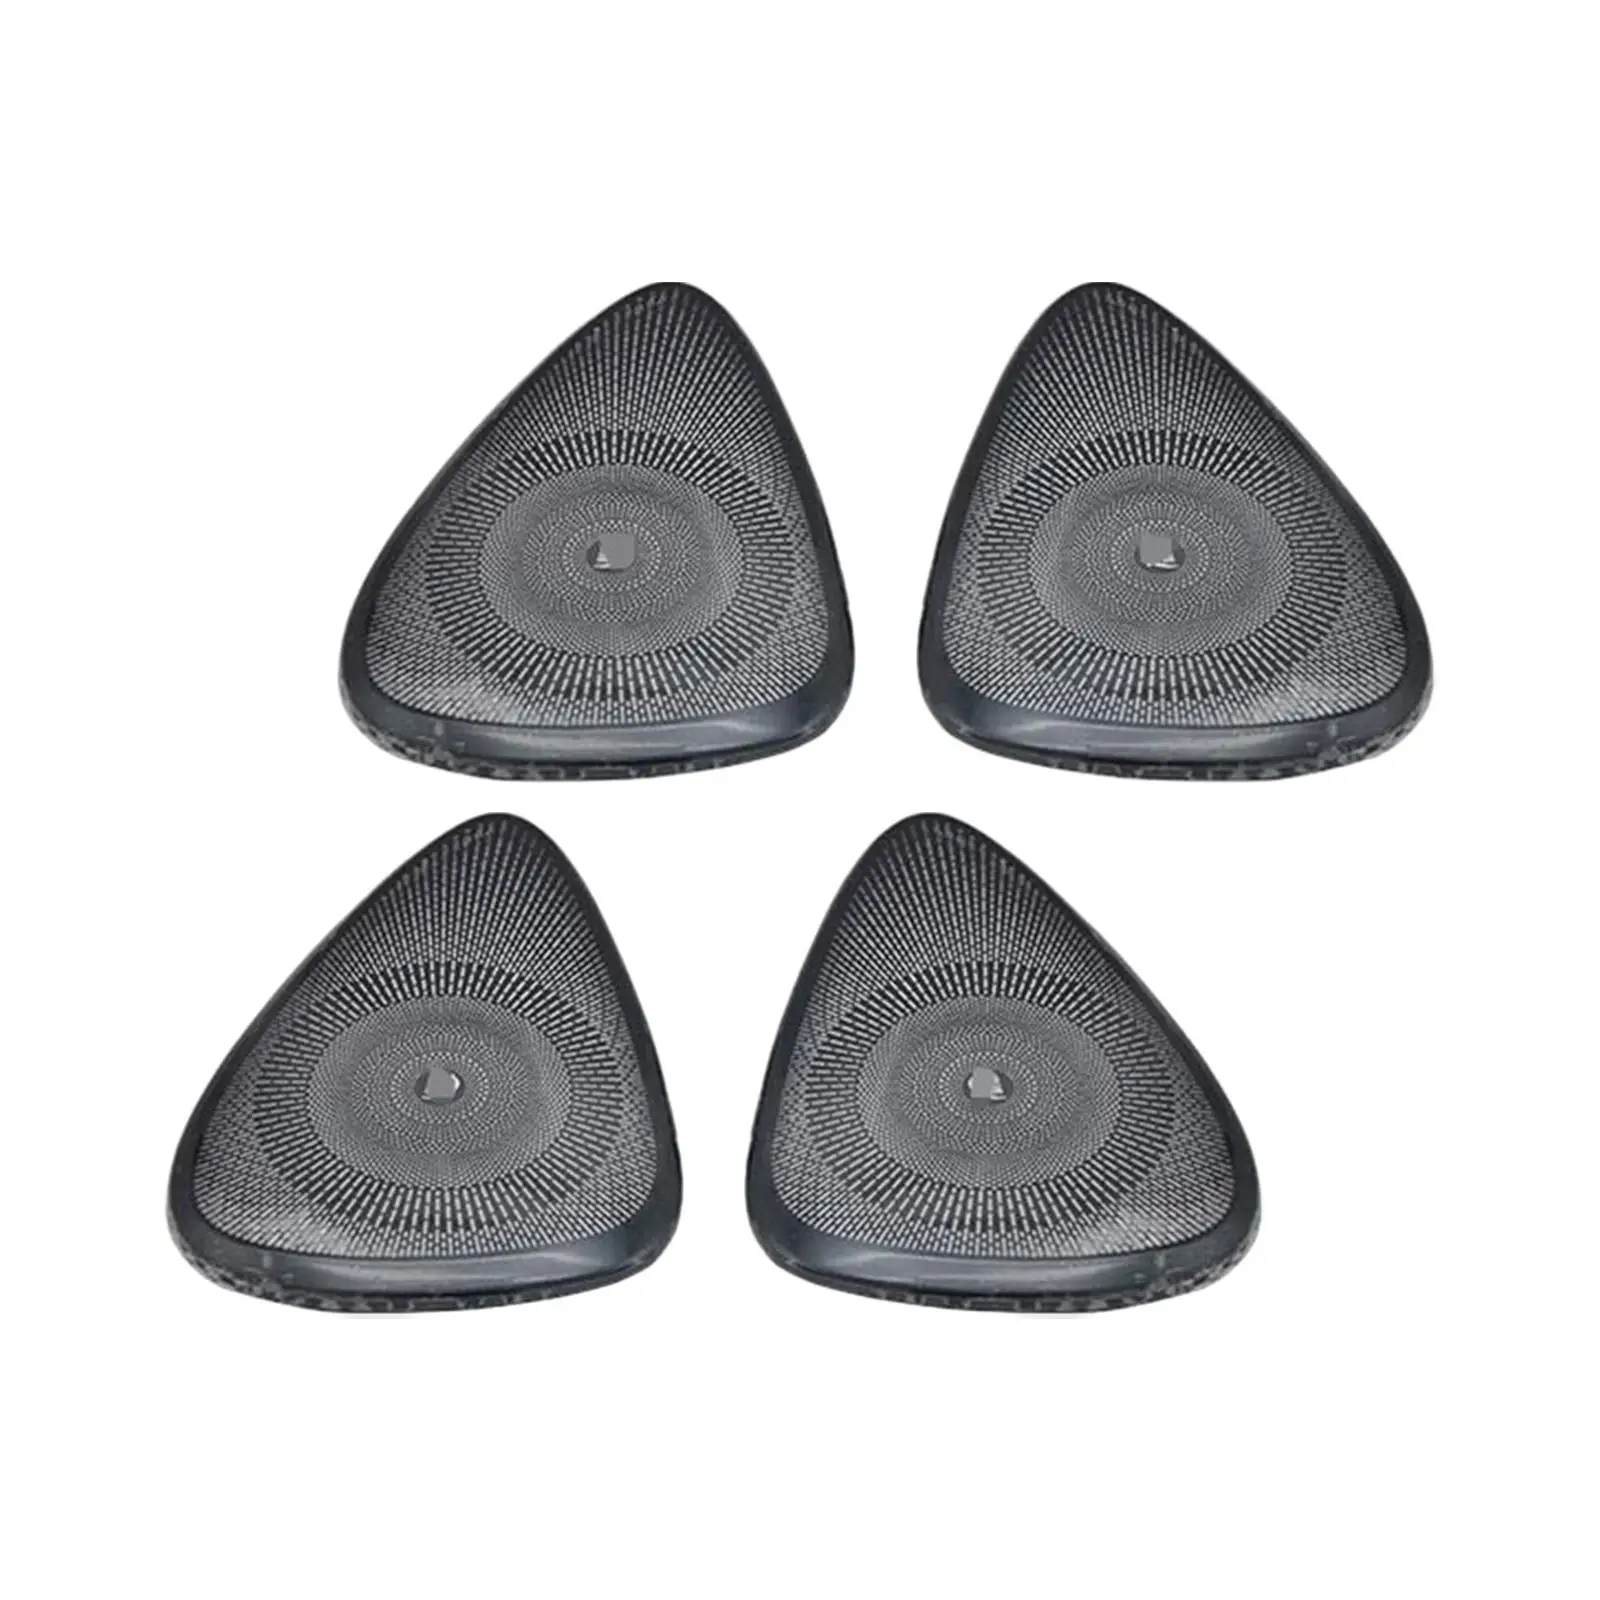 4 Pieces Replacement Door Speaker Cover for Byd Dolphin 23 Professional